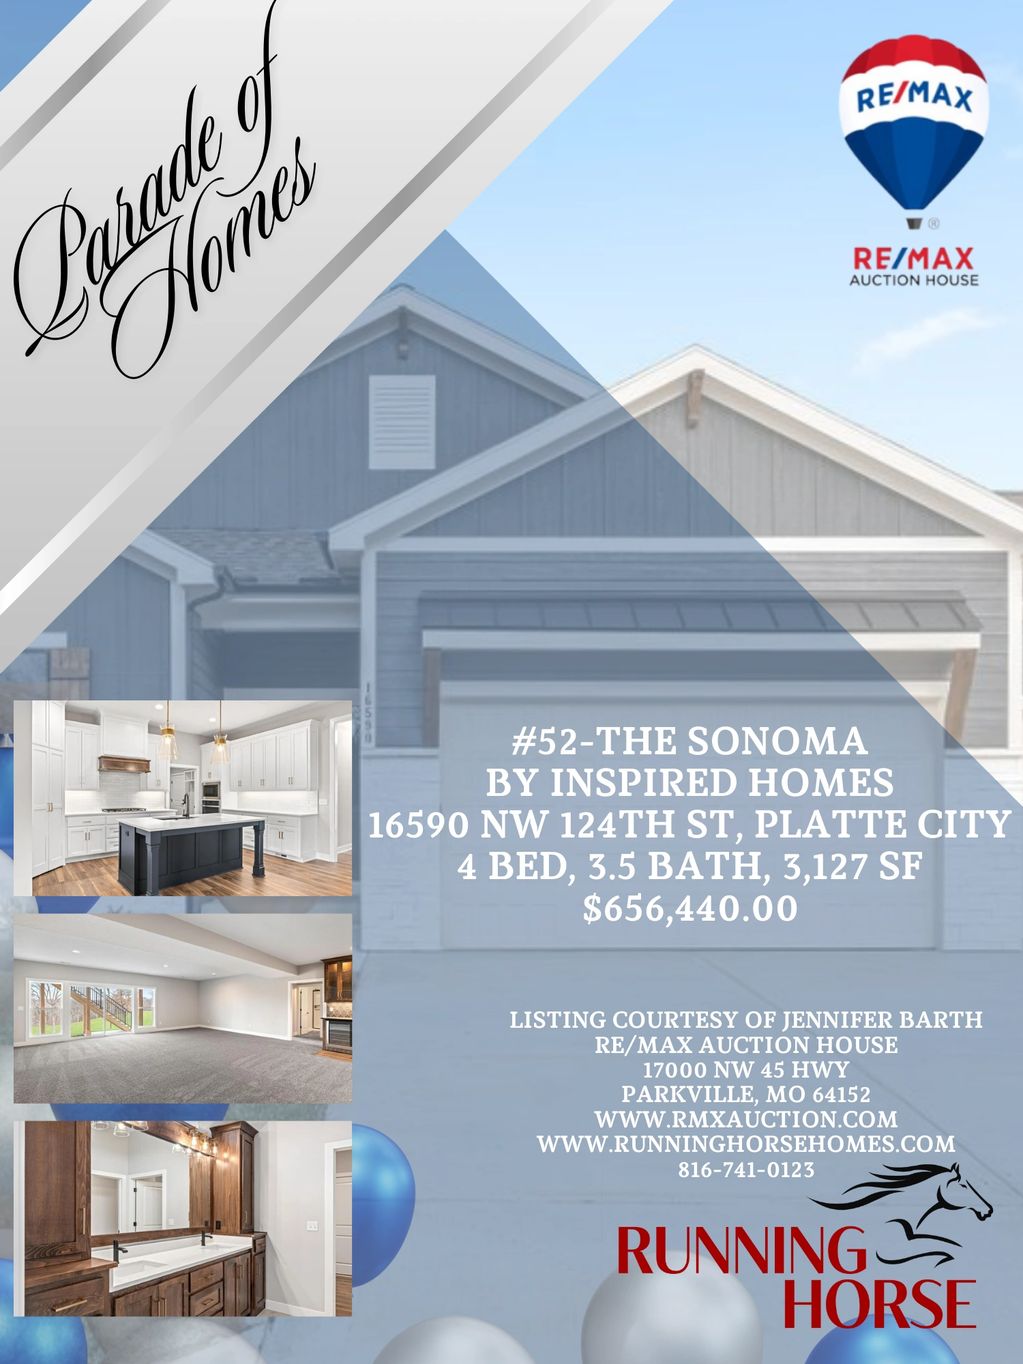 The Sonoma by Inspired Homes
Reverse 1.5, 4 Bedroom, 3.5 Bath, 3,127 SQFT, 3 Car Garage.  This home 